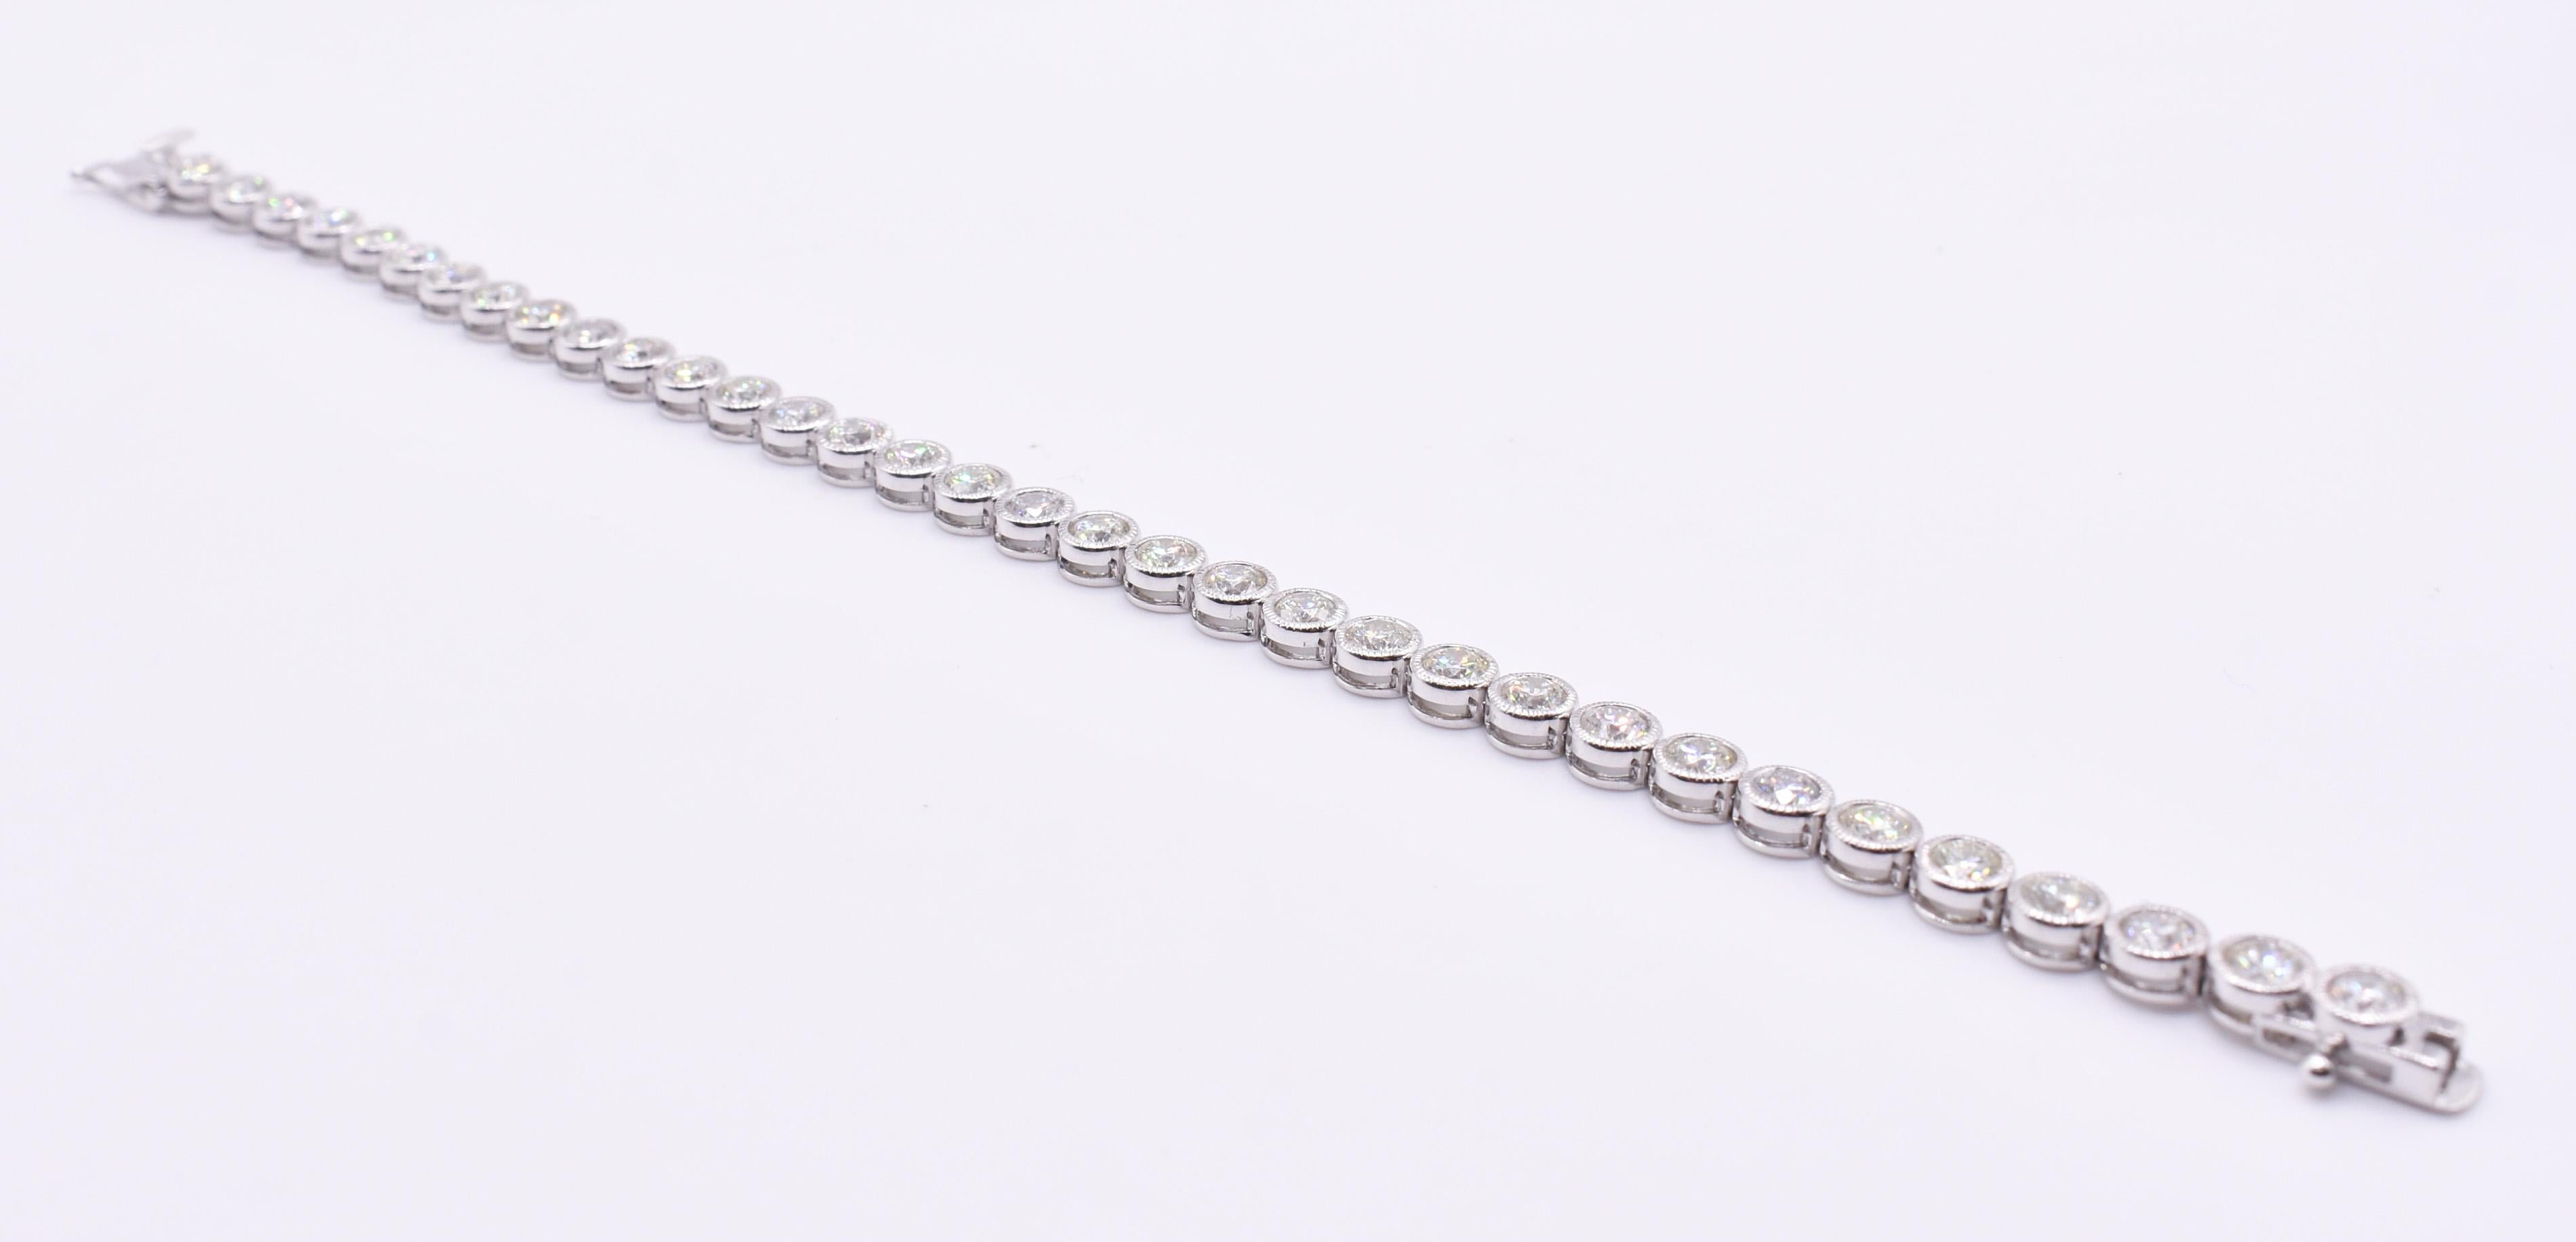 For sale is a fine 18k white gold 6.62ct diamond tennis bracelet, 34 diamonds in a rub over miligrain setting, individually hinged with a box and tongue clasp. 

Metal: 18k White Gold
Total Carat Weight: 6.62ct
Clarity: SI/VS
Colour: H/I
Gold